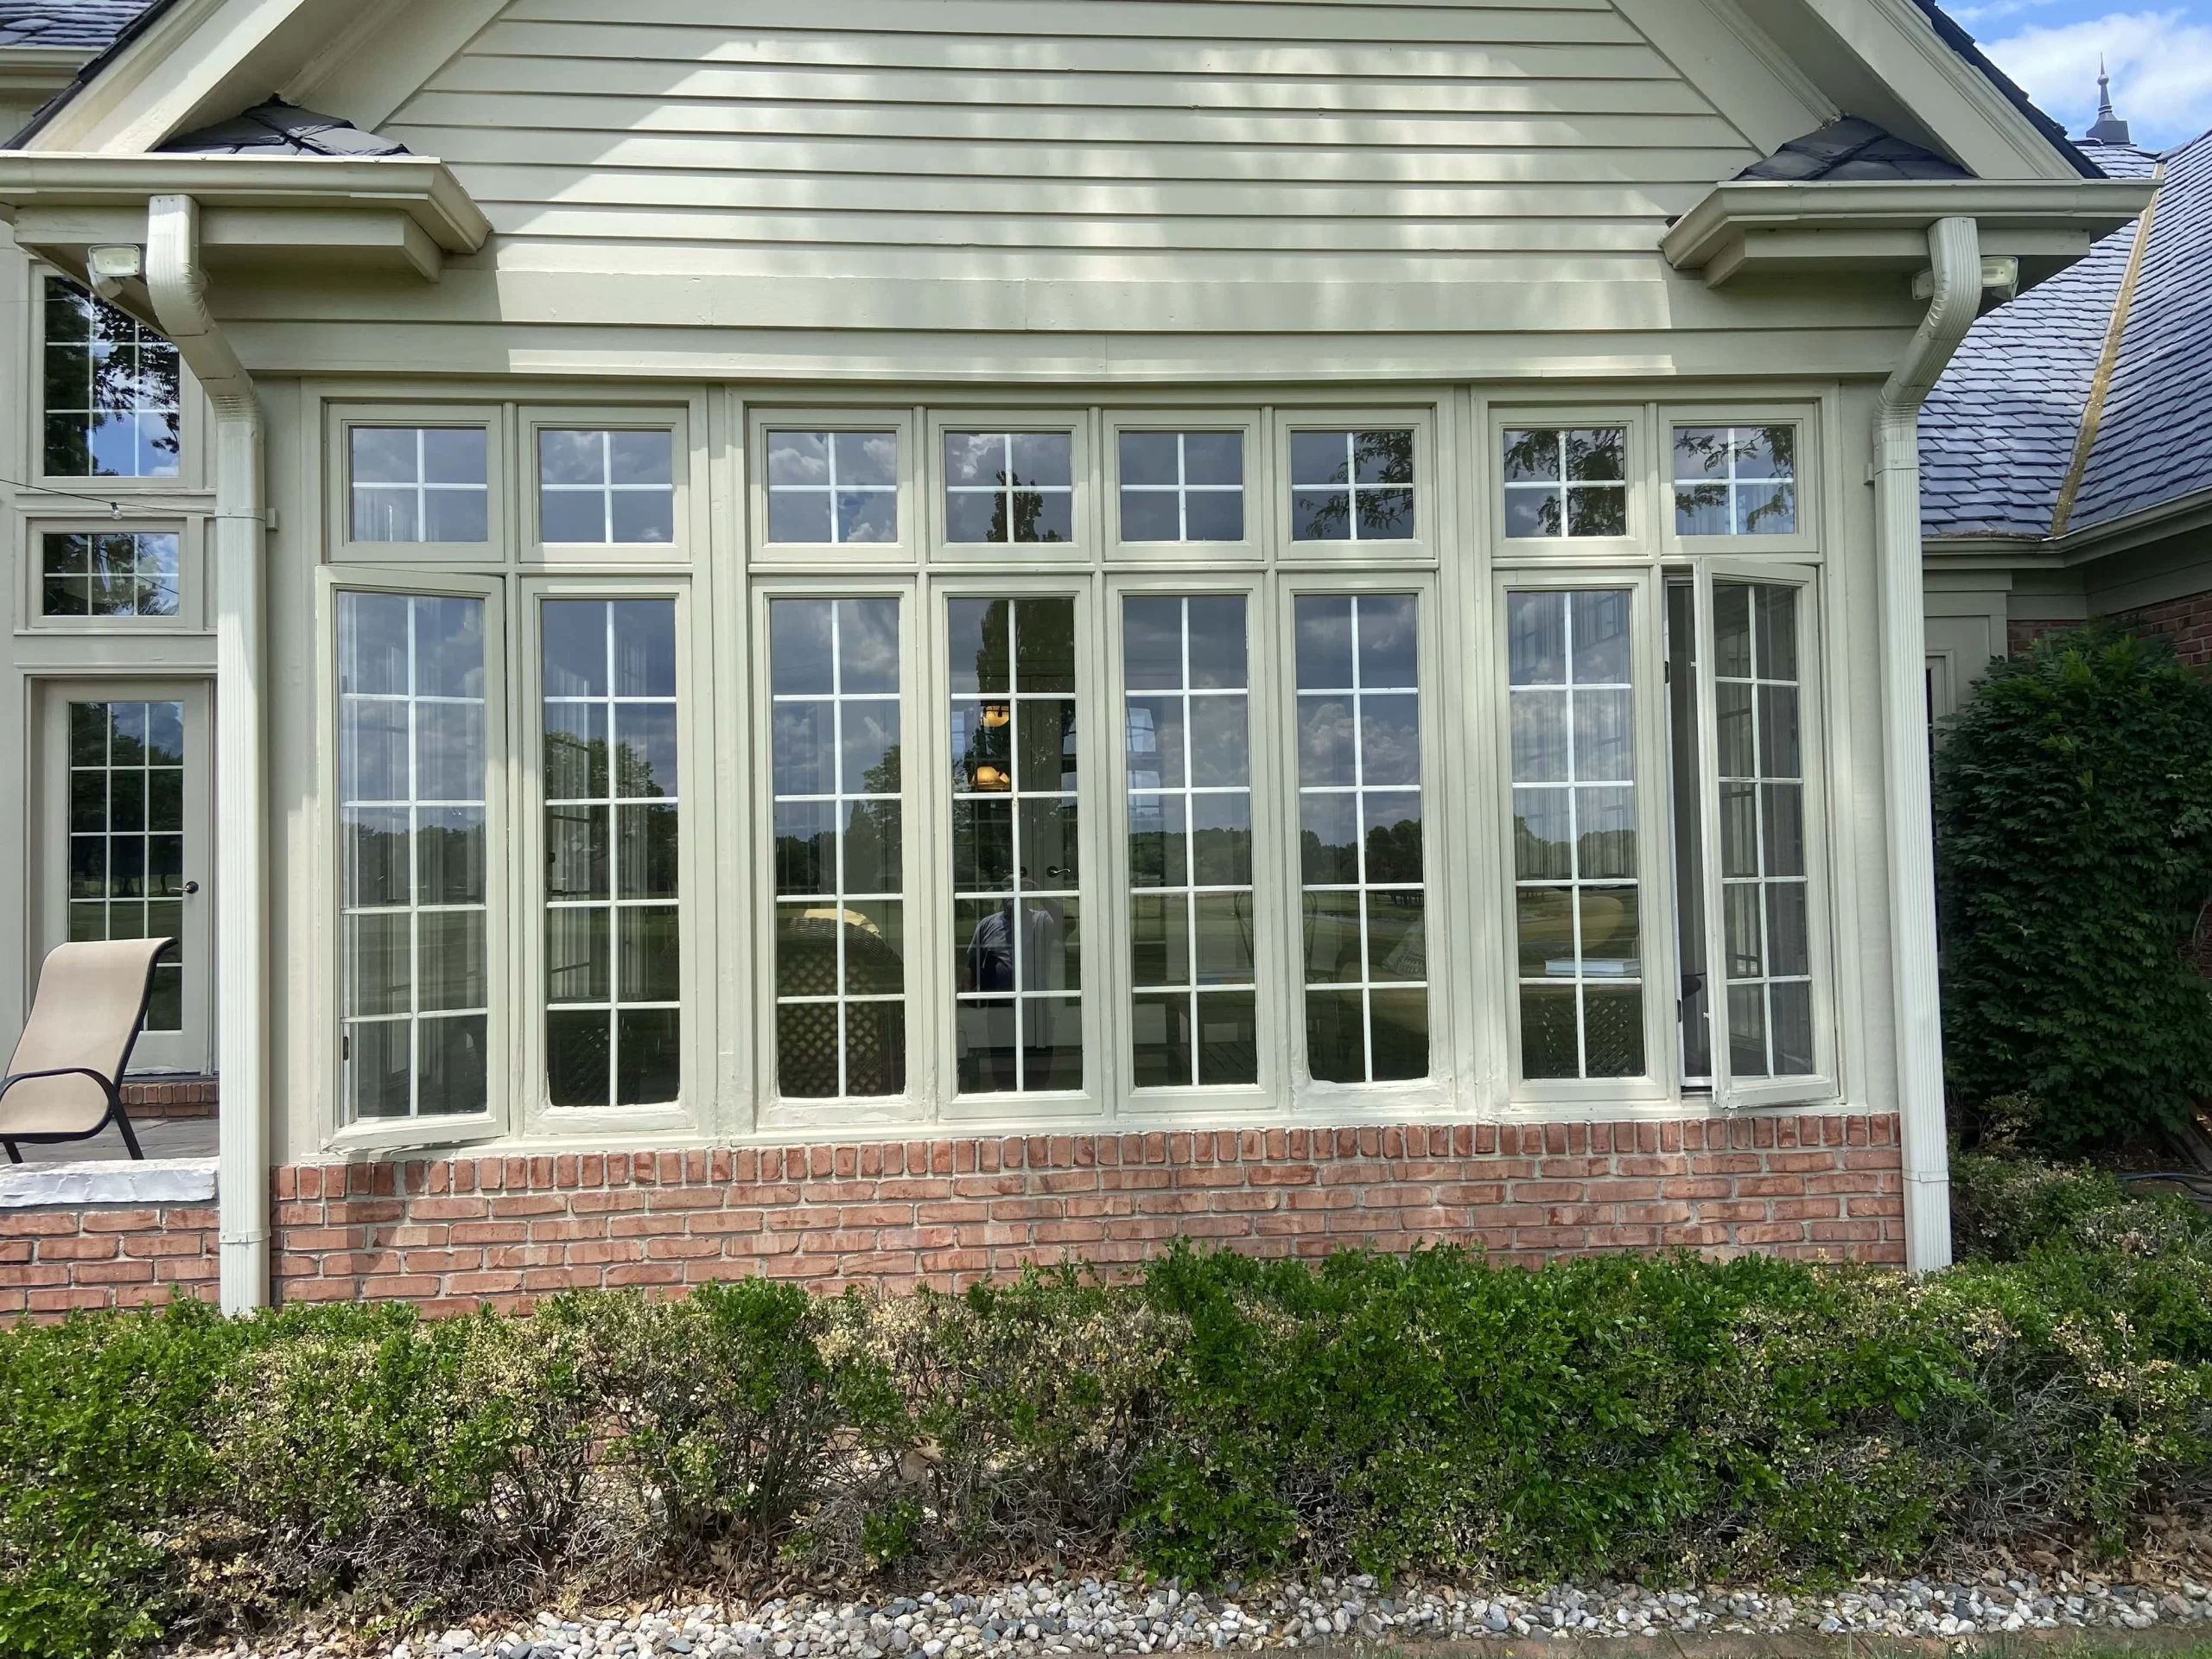 Rotten Wood Window Frame Repair and Restoration in Crystal Lake, IL